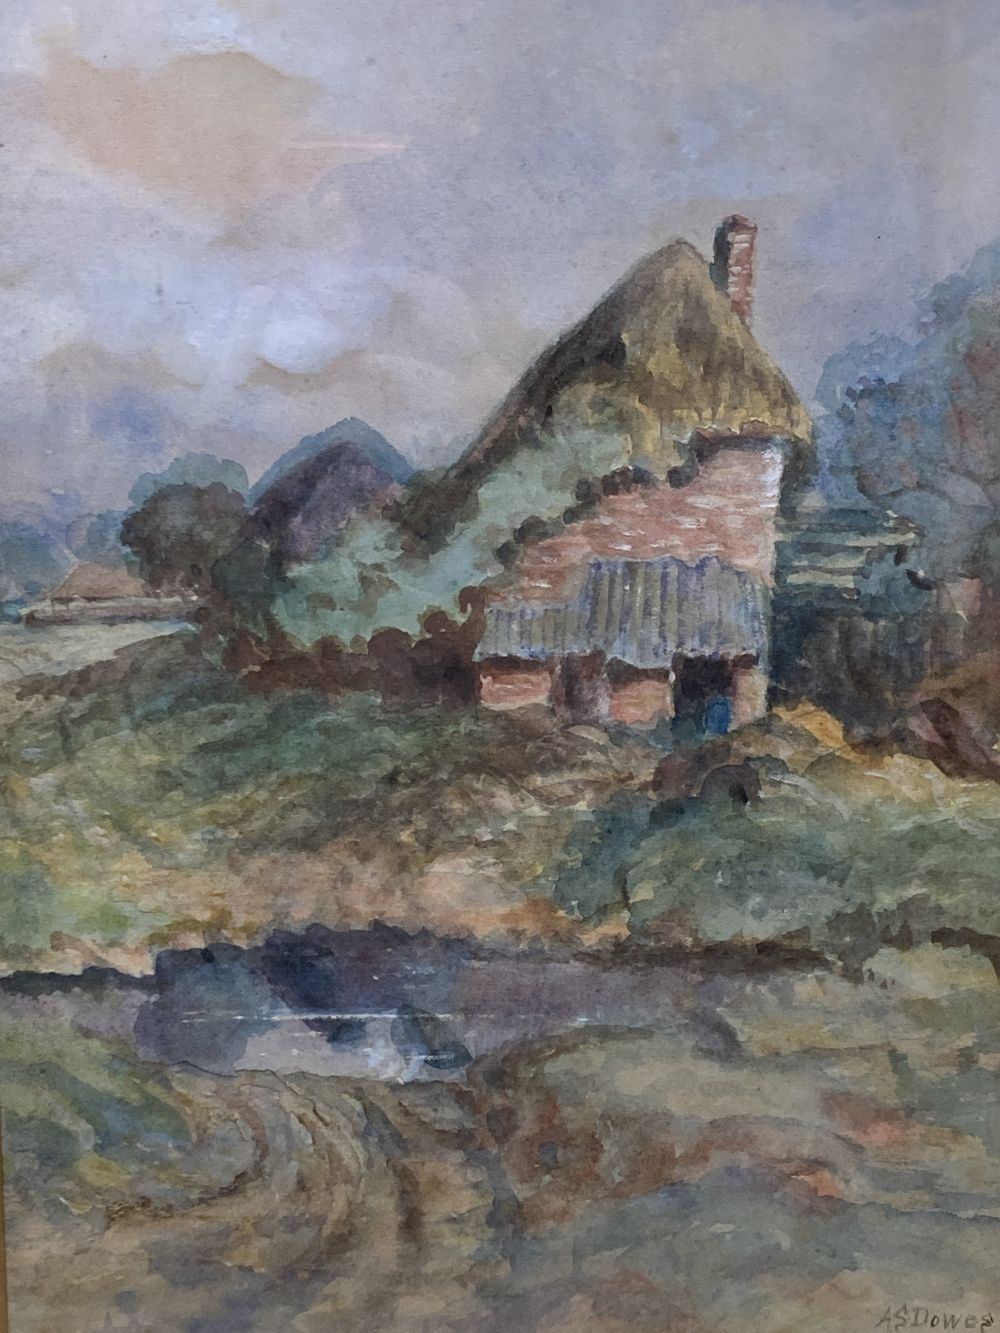 A.S. Dowes (c.1900), pair of watercolours, Old cottage at Nutbourne, Sussex and a Tudor cottage, Poinsted, Sussex, signed, 35 x 22cm